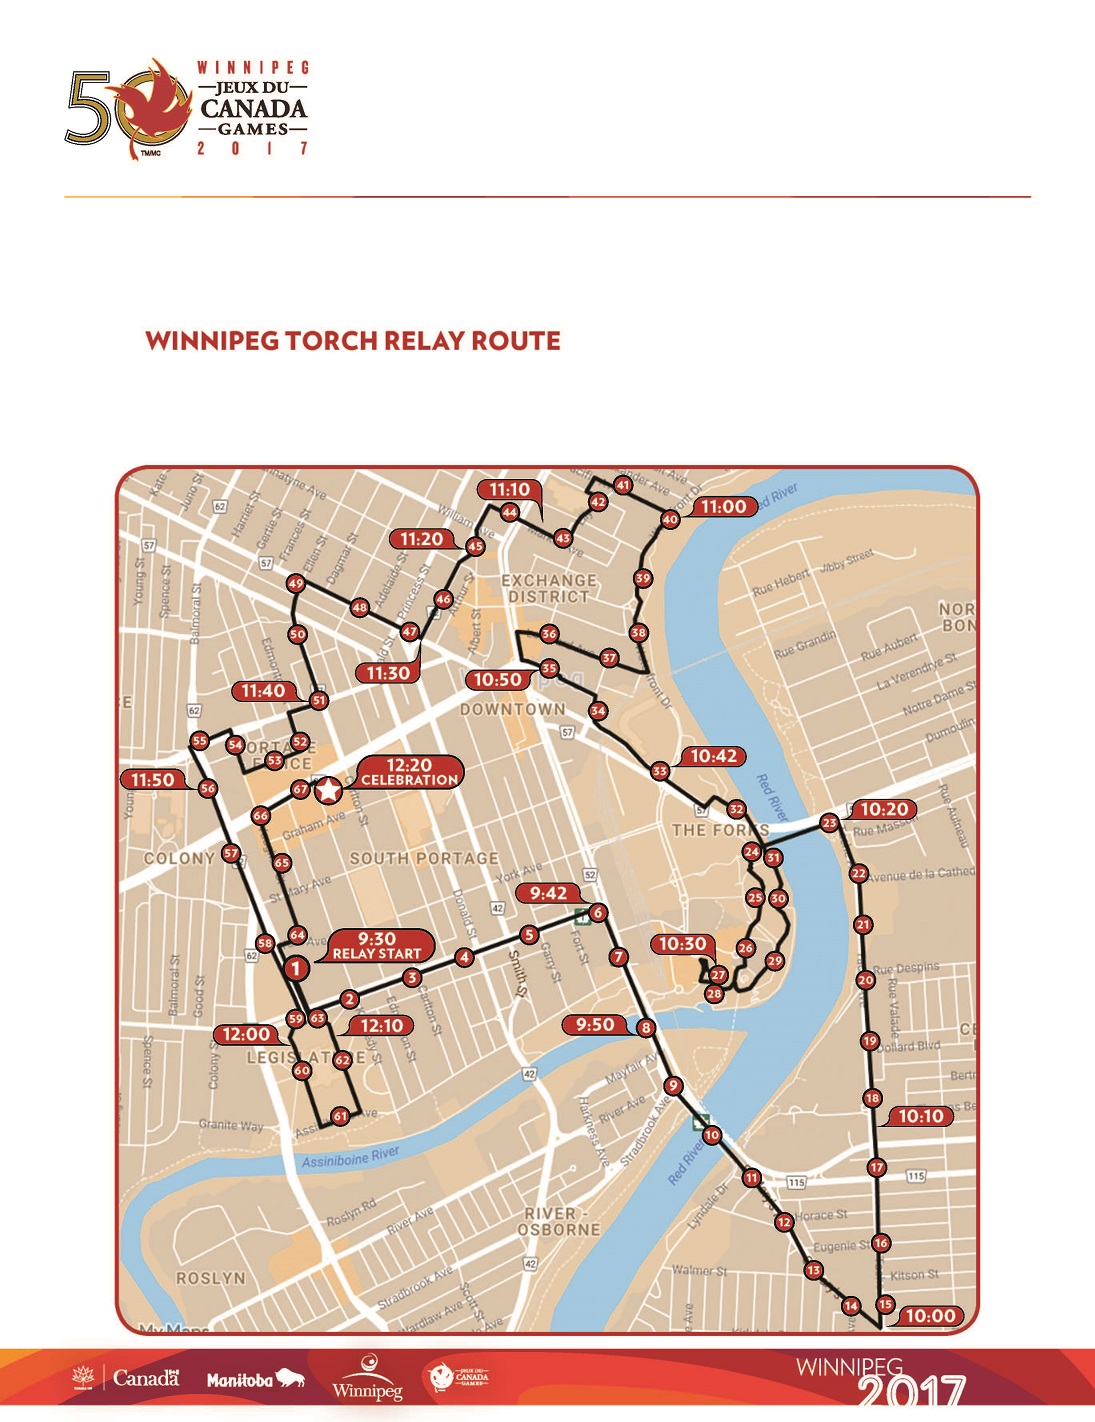 Canada Summer Games: Torch Relay - image